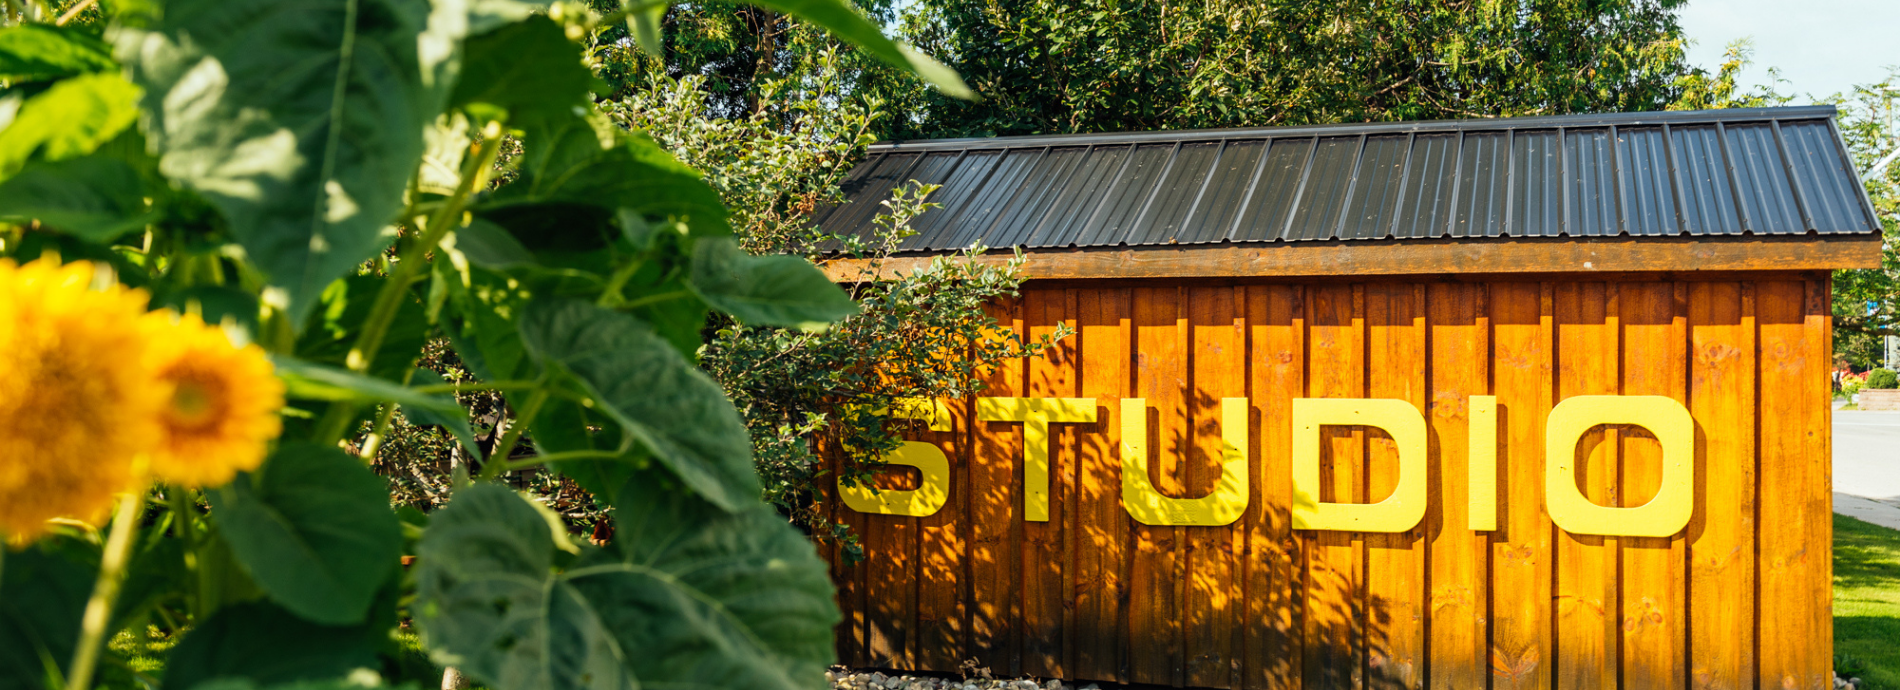 art studio building in Coldwater surrounded by sunflowers